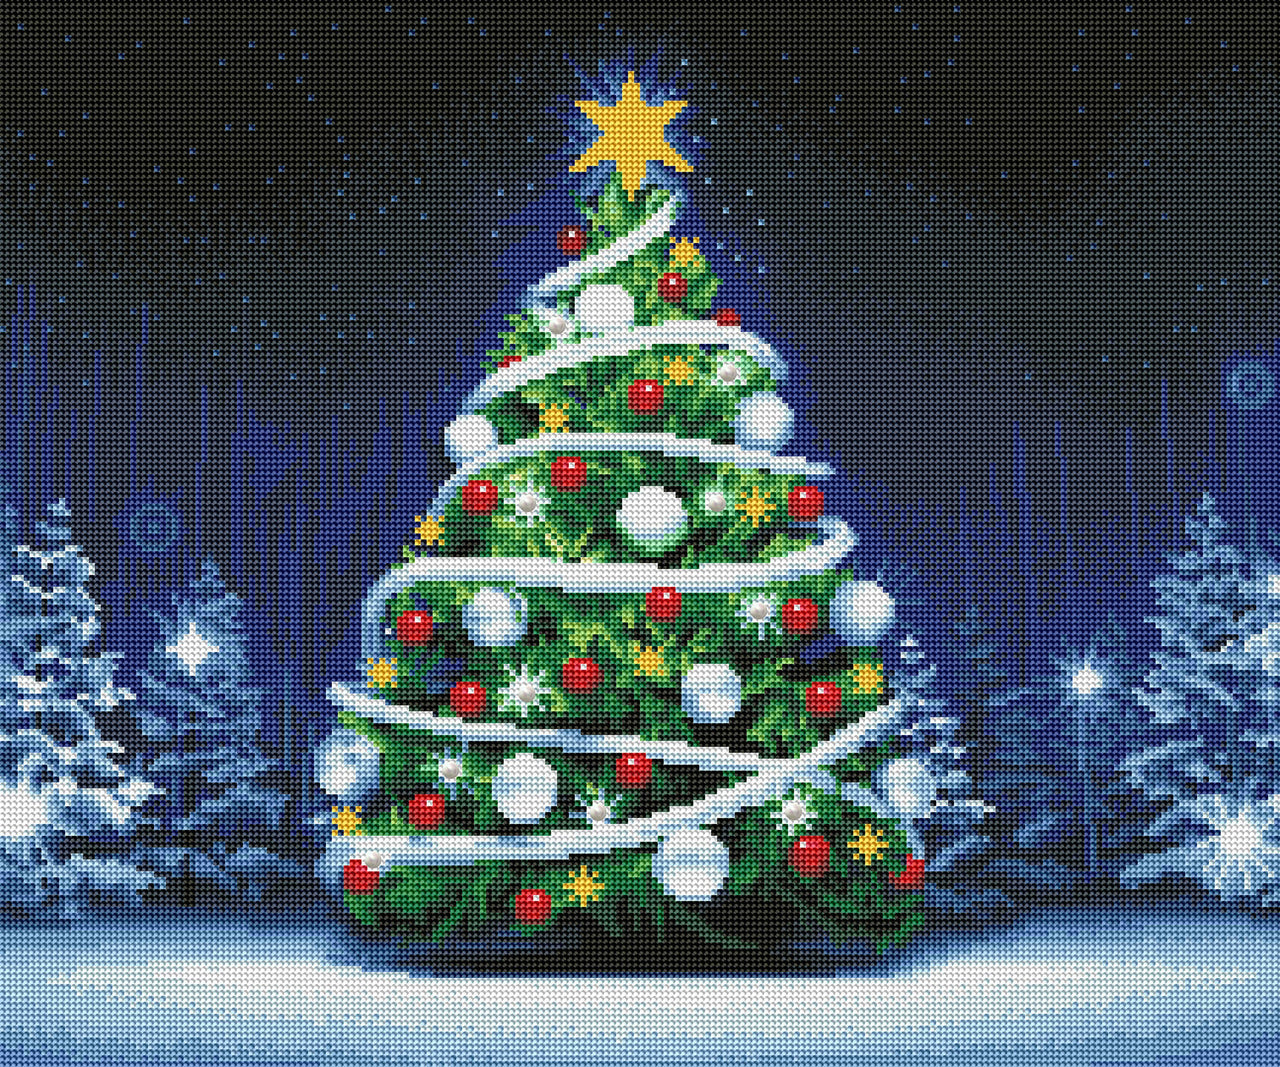 Diamond Painting Limited Edition | Glowing Christmas Tree 20" x 24″ (51cm x 61cm) / Round With Aurora Borealis Accents / 32 Colors Including 1 AB, Special Pearls, and 1 Glow-in-the-Dark Color